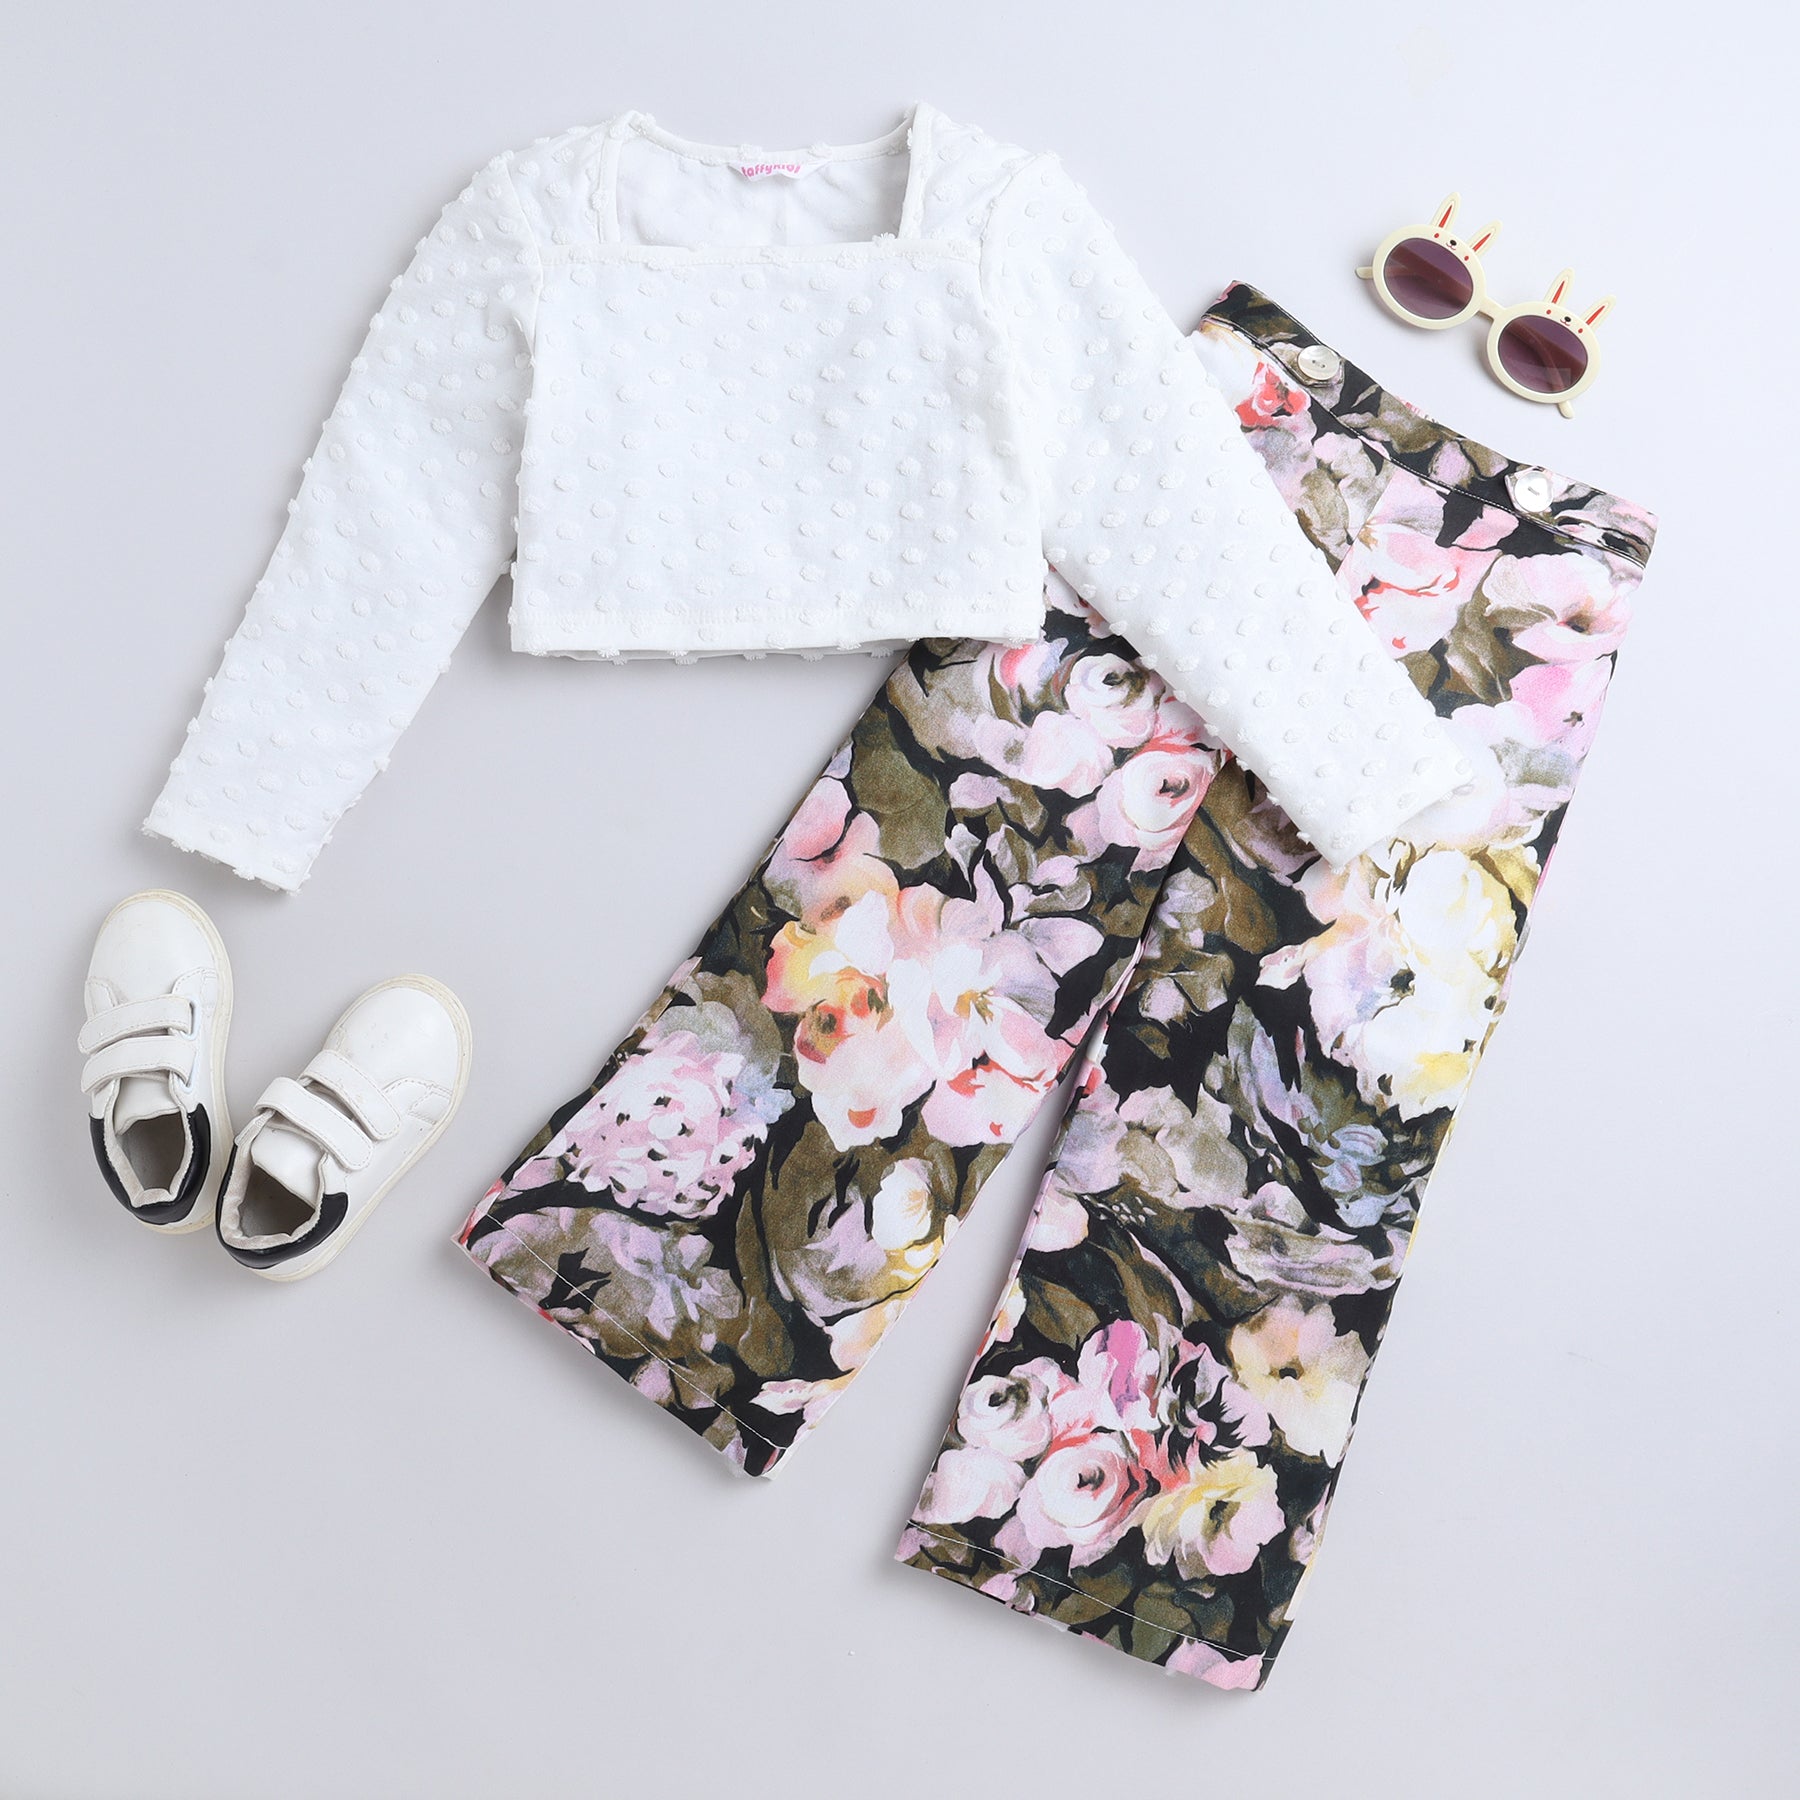 Dobby design full sleeves square neck crop top with floral printed button detail pant set-Off white/Multi